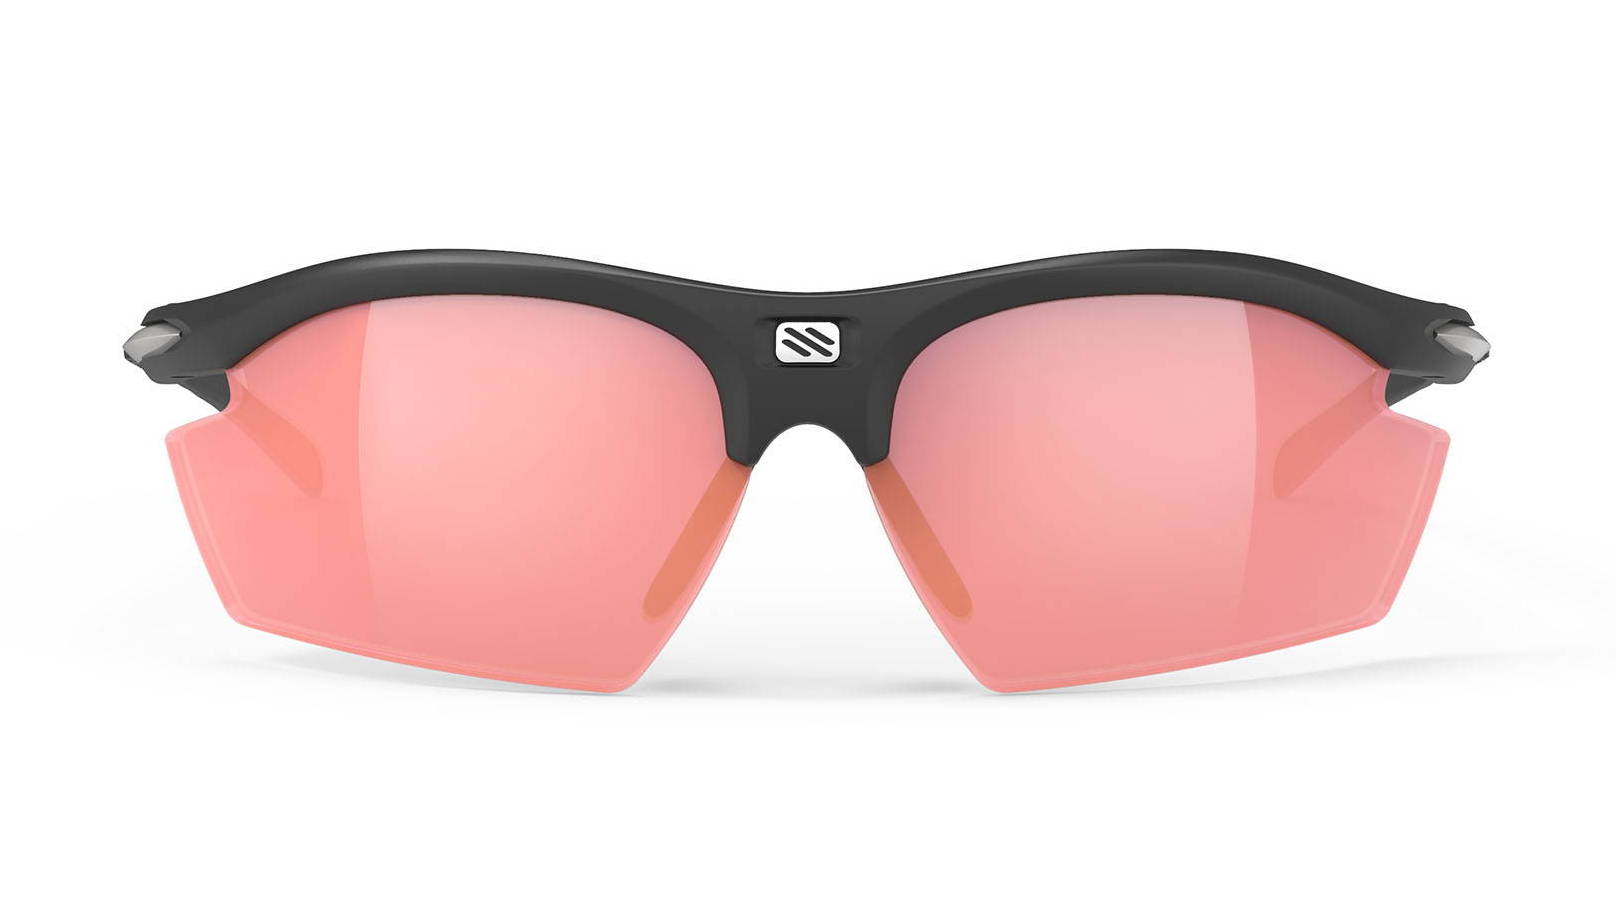 Rudy Project Rydon sport sunglasses Buyer's Guide